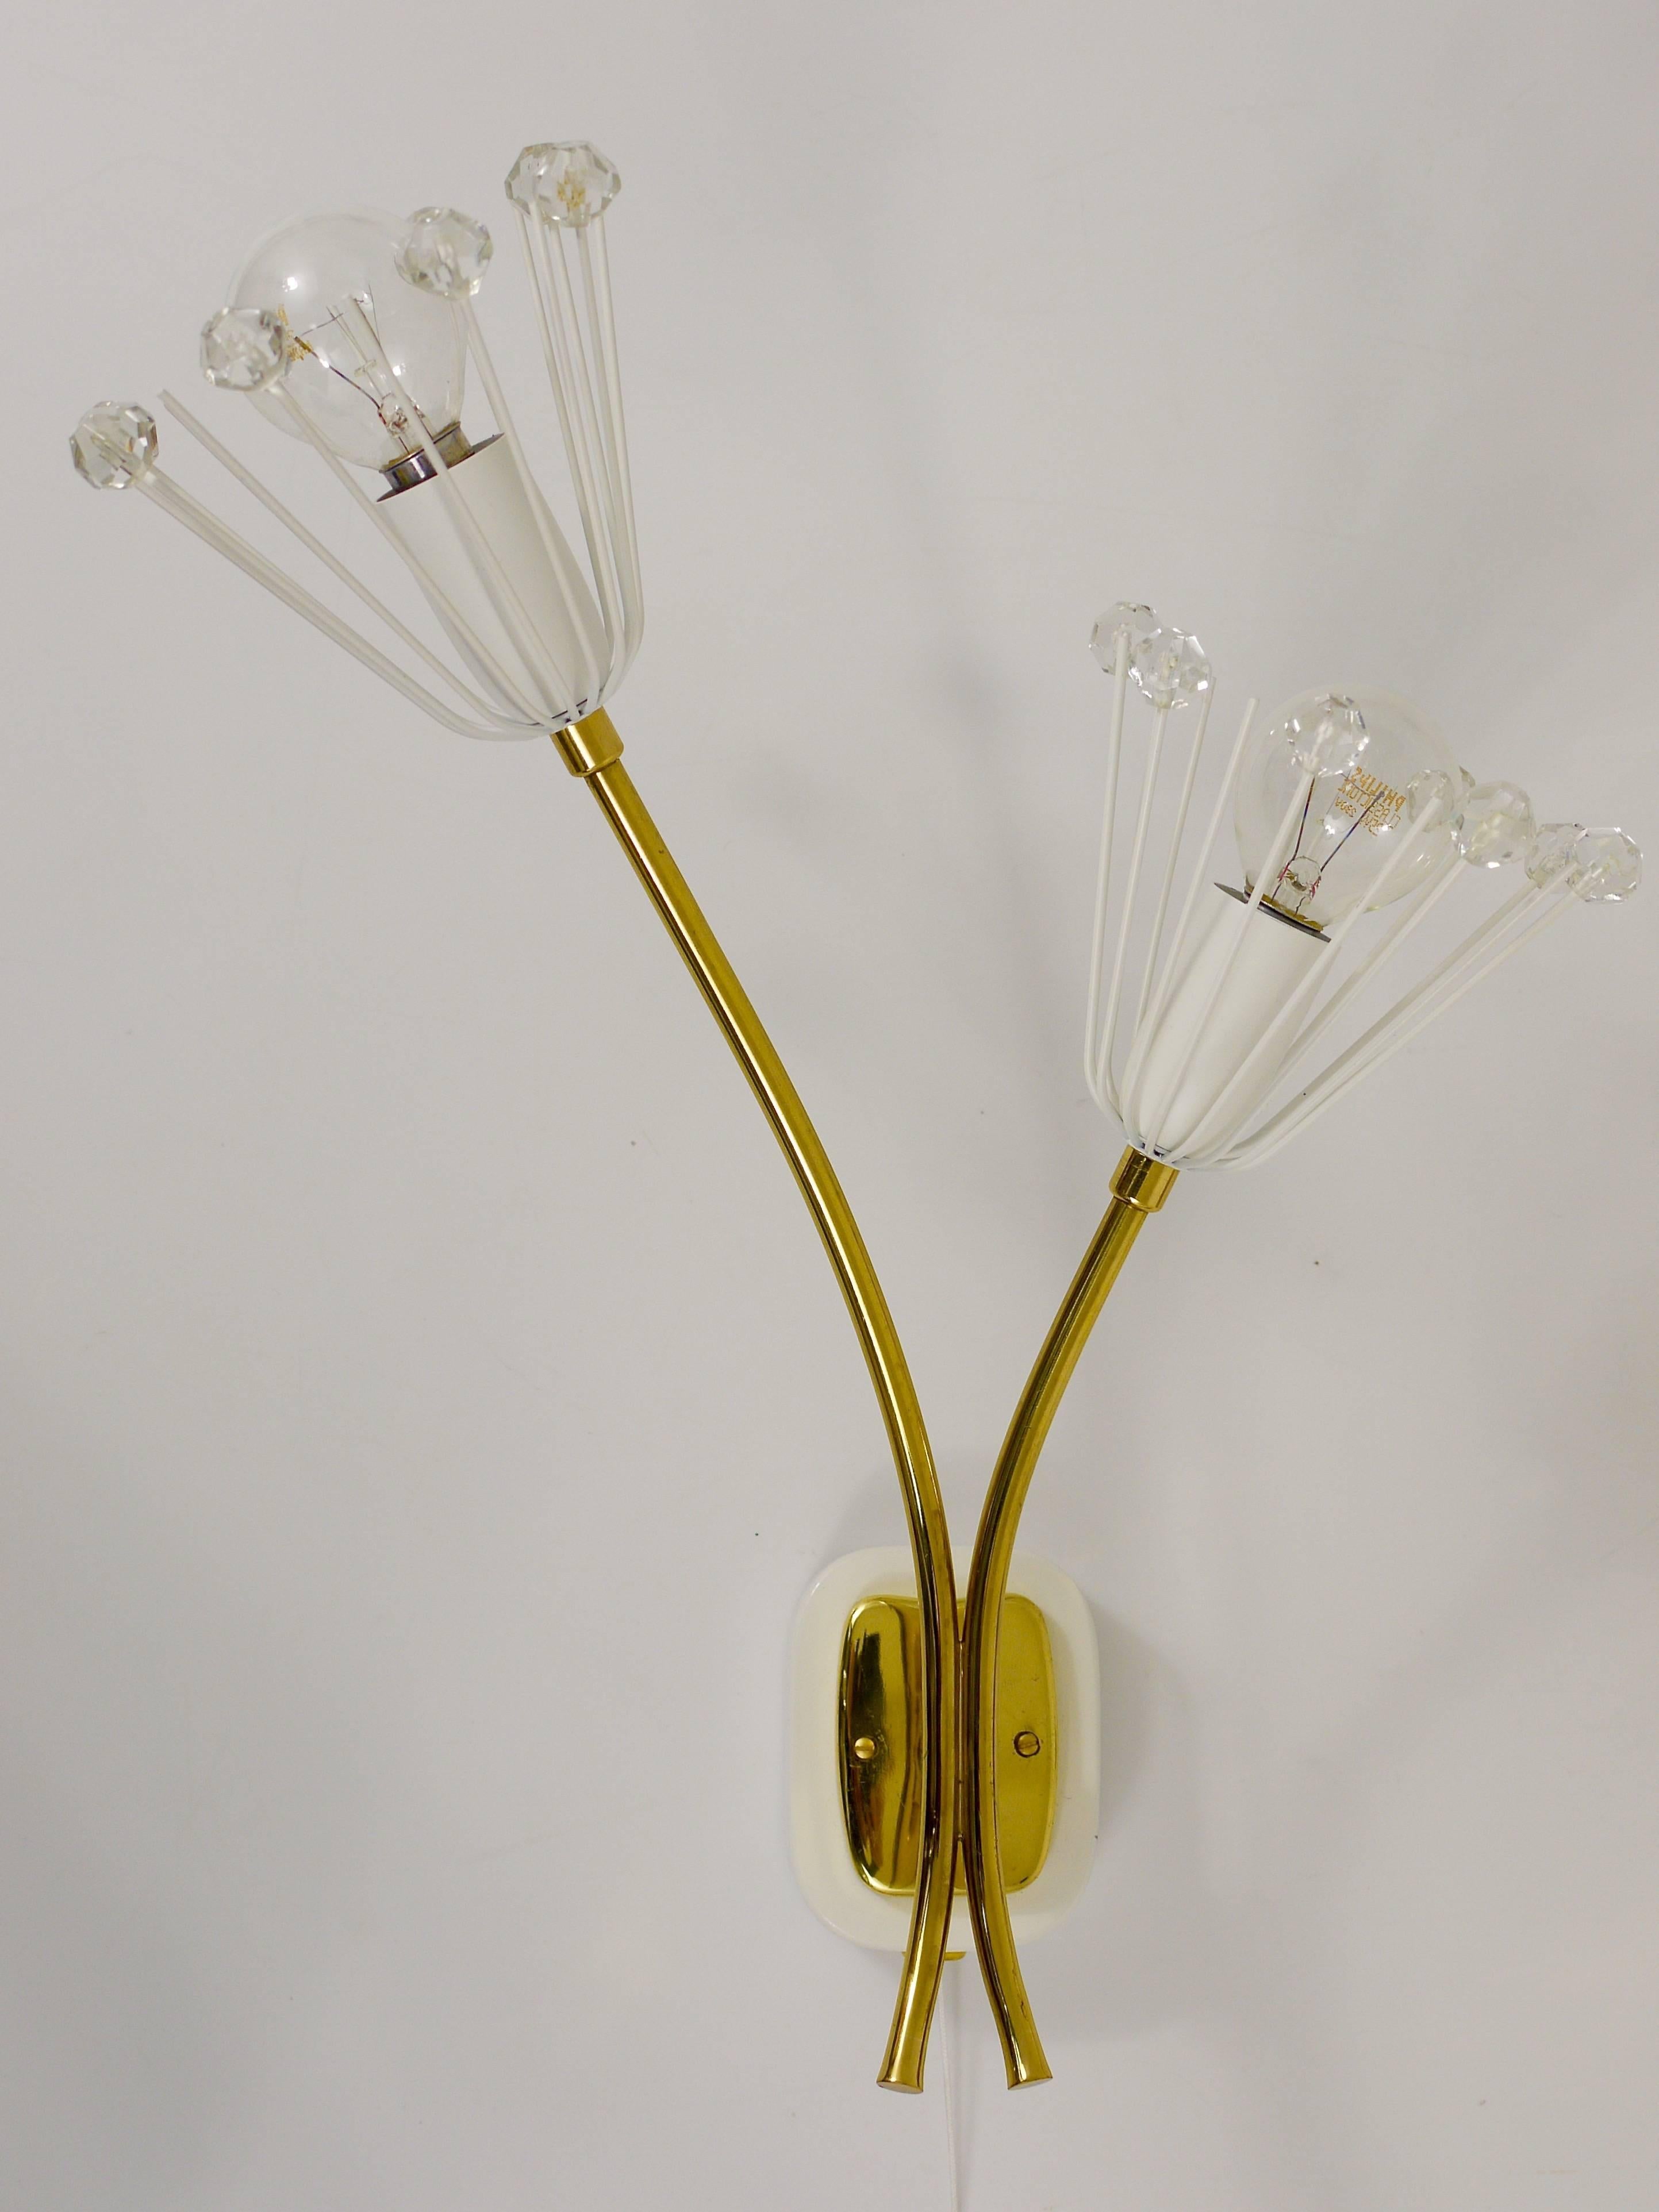 Up to 3 identical pairs of Austrian floral brass wall lights with two arms and glass crystals and integrated switches. Designed by Emil Stejnar, executed by Rupert Nikoll in the 1950s. Professionally restored and rewired, in very good condition. 3